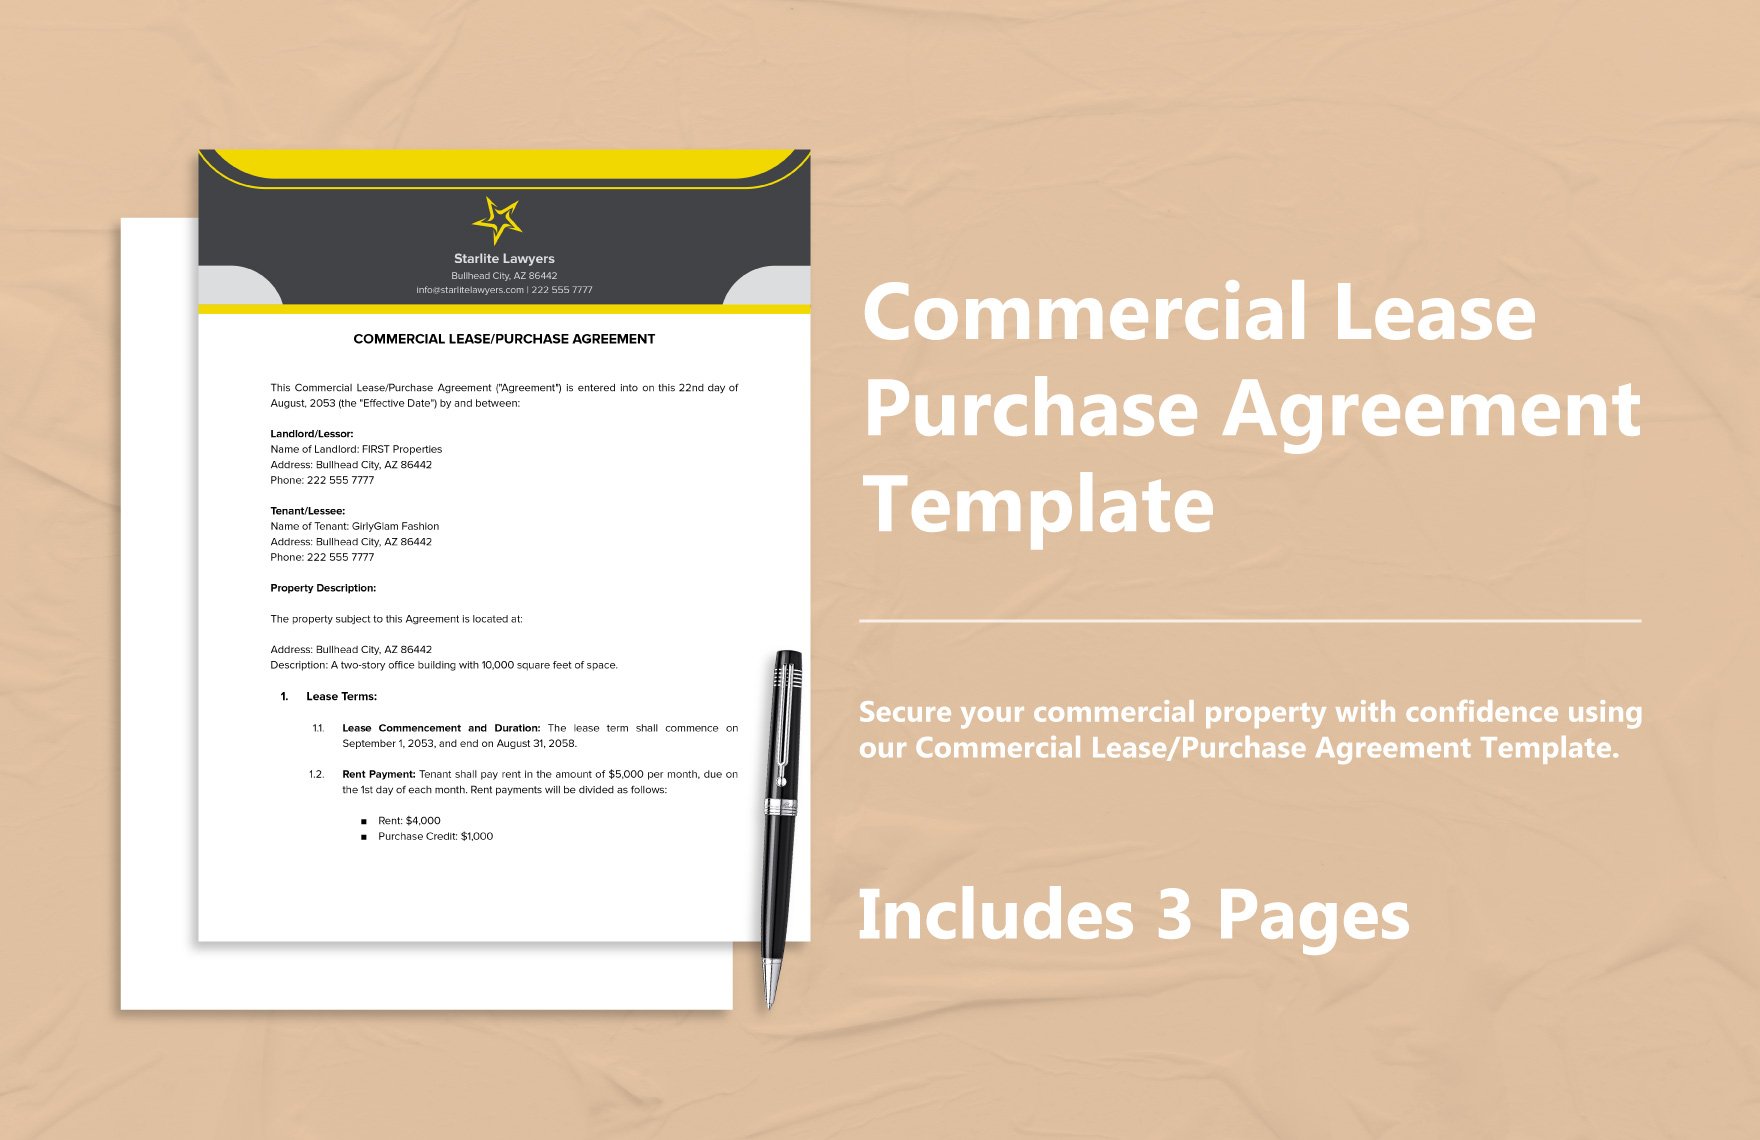 Commercial Lease/Purchase Agreement Template